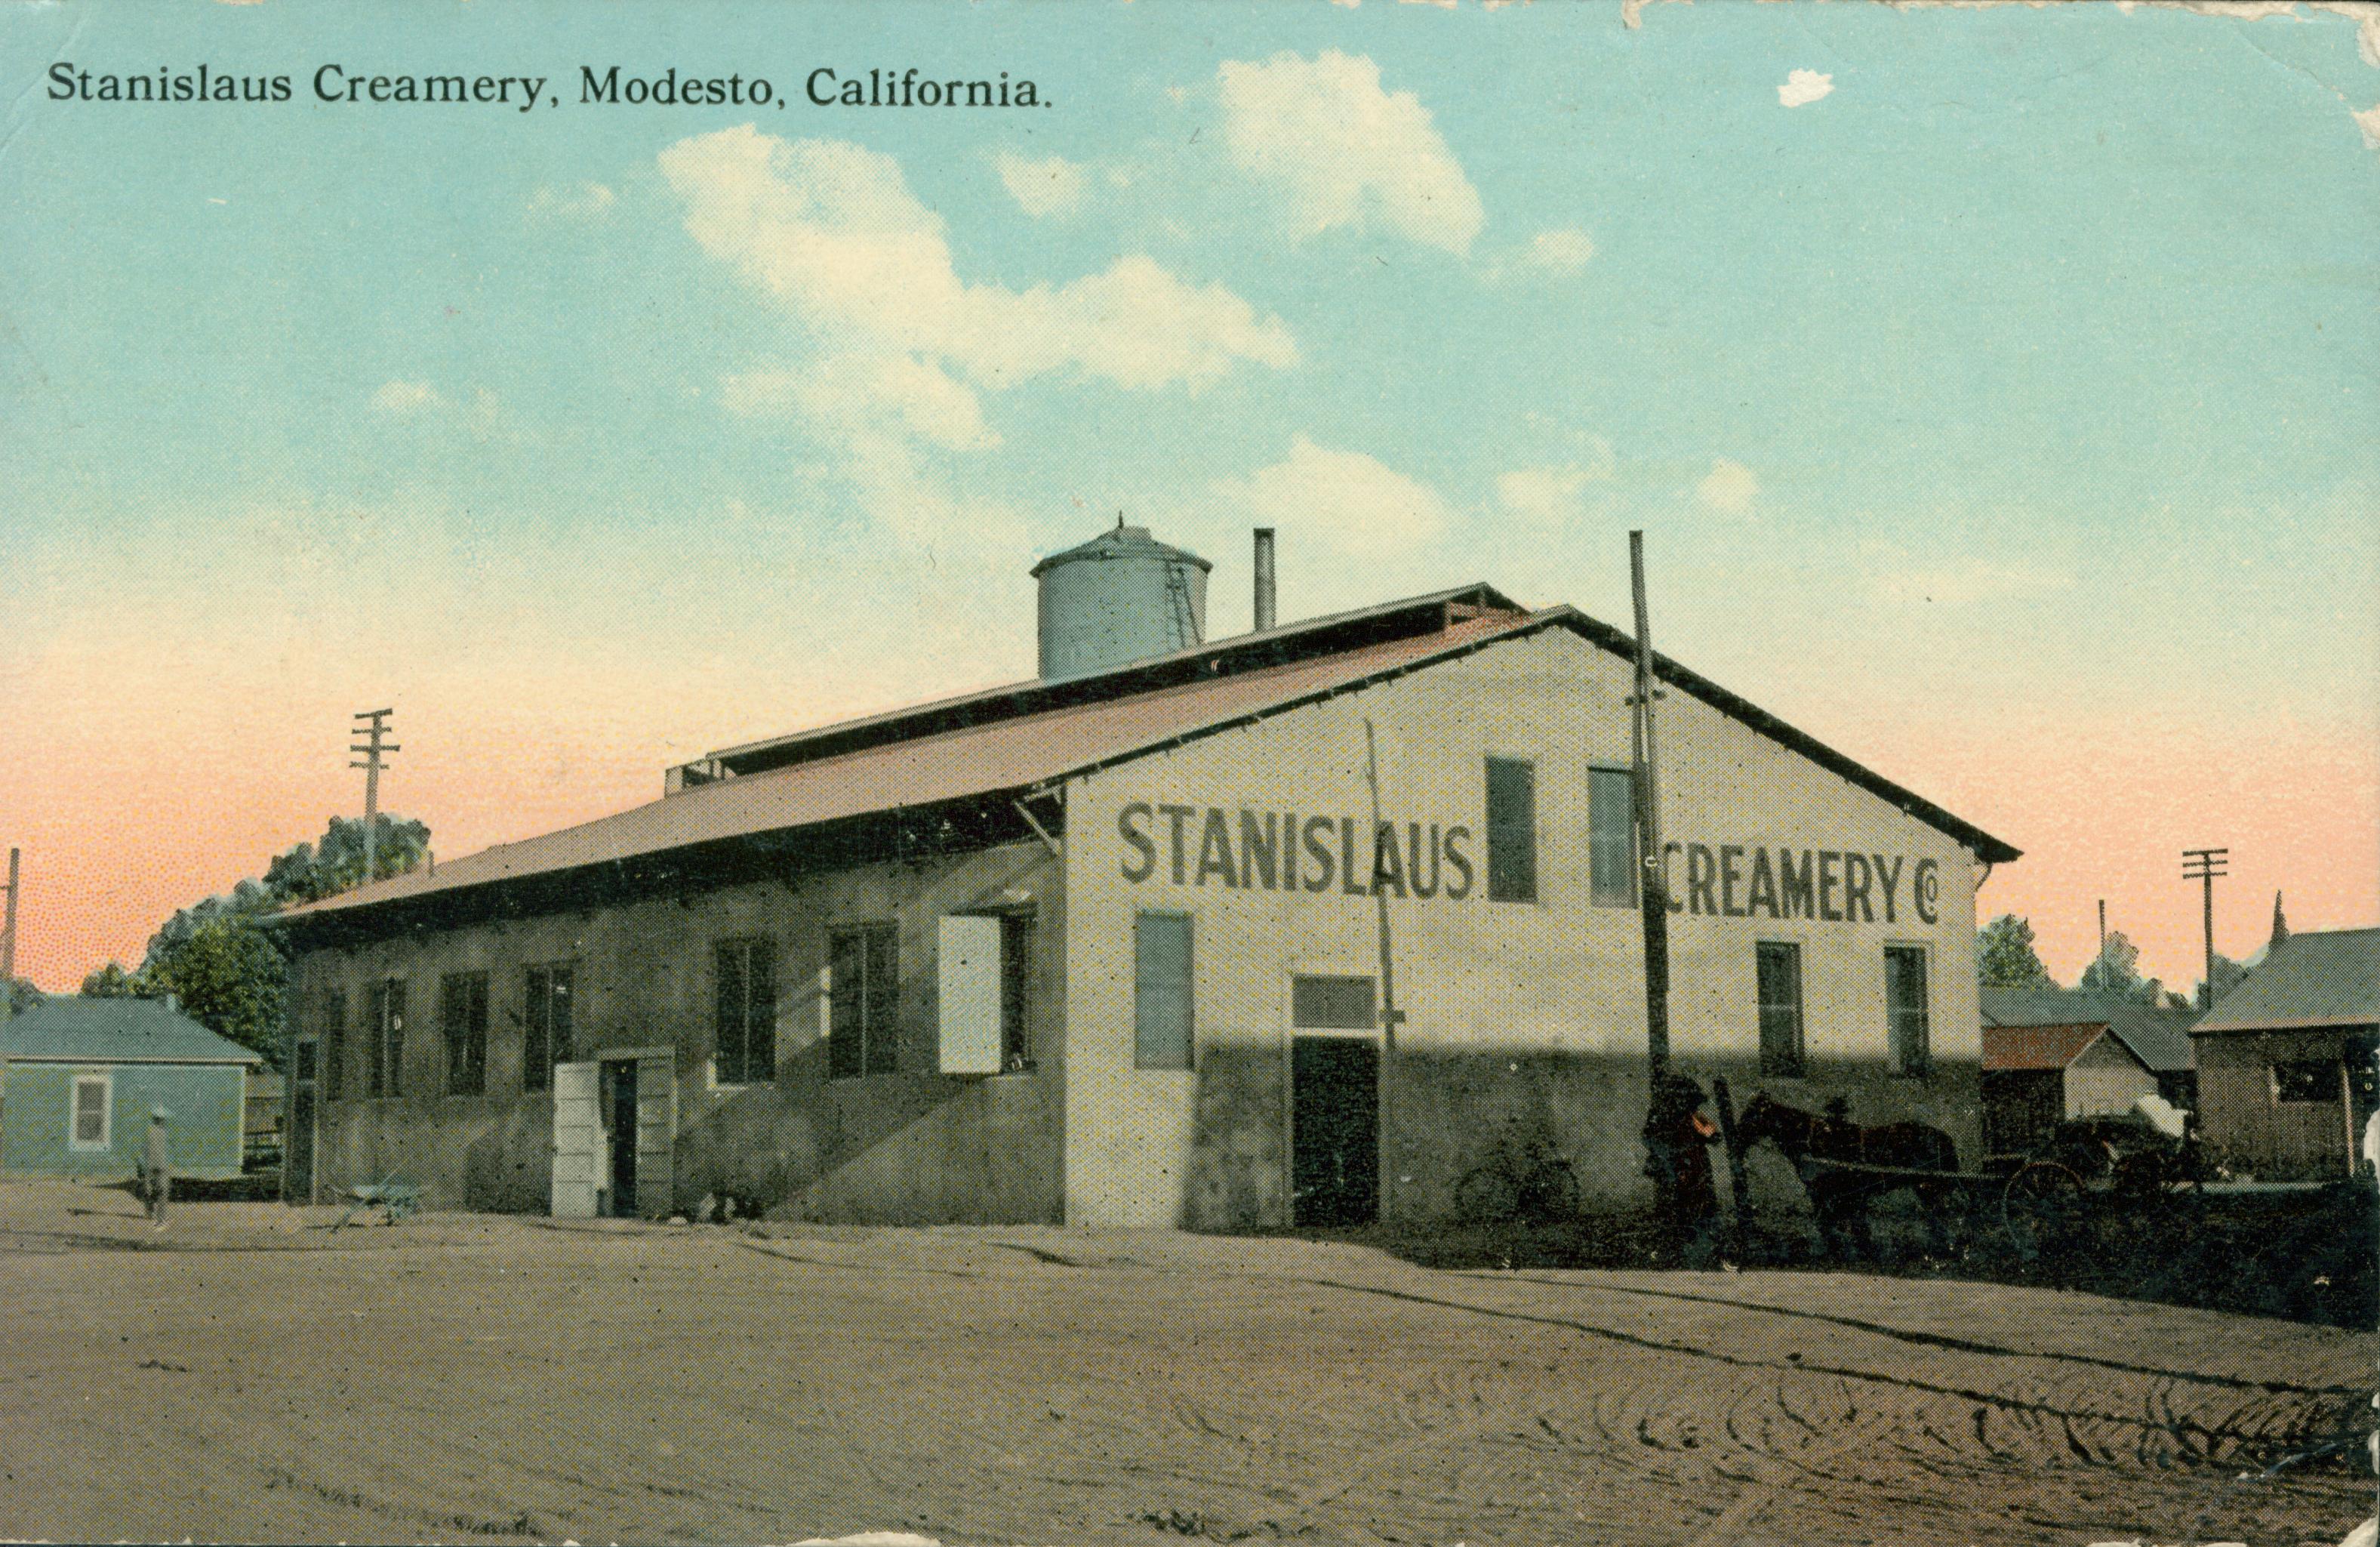 Shows a corner view of the Stanislaus Creamery